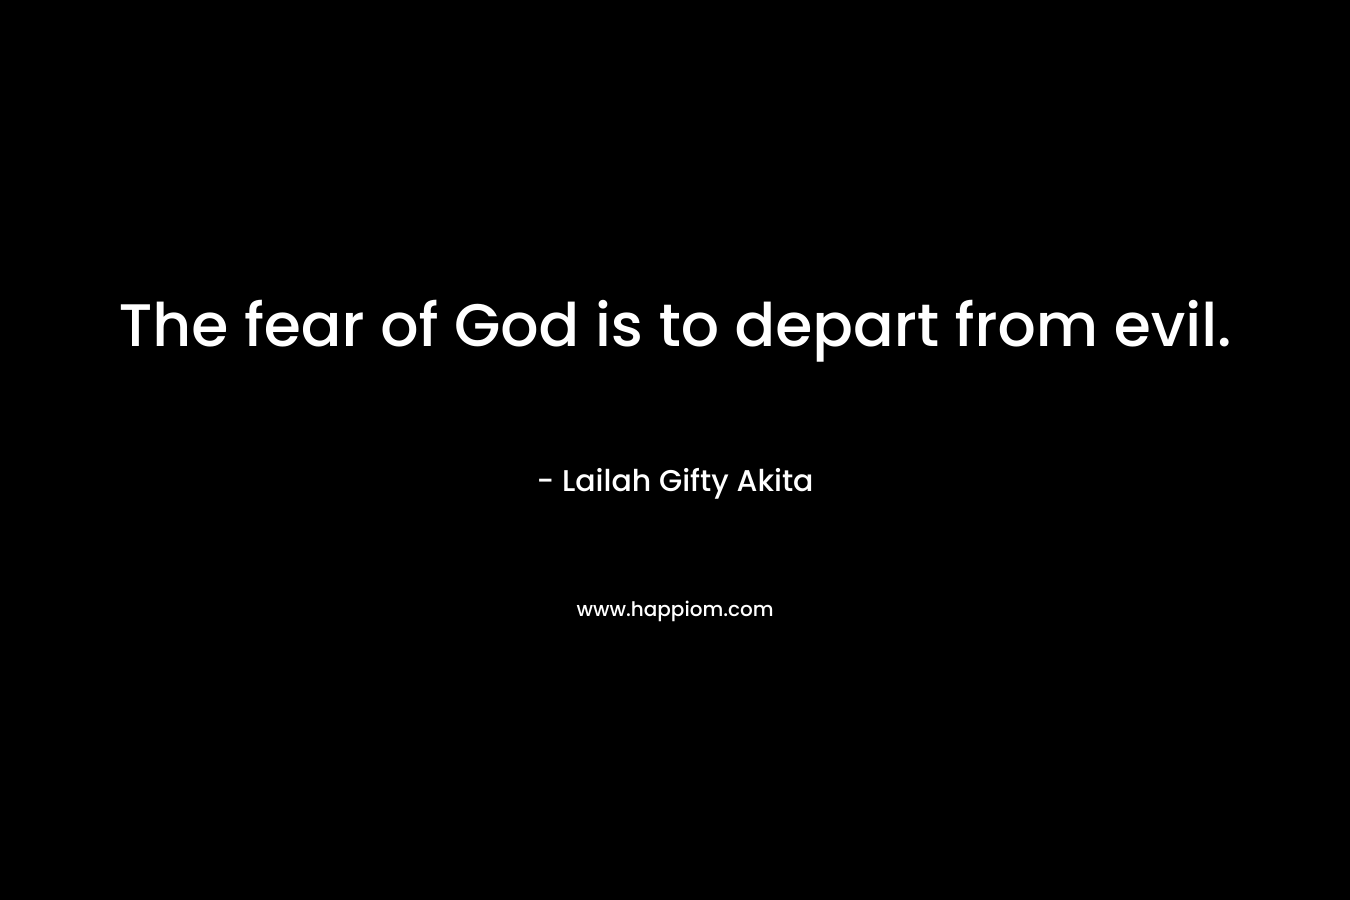 The fear of God is to depart from evil.